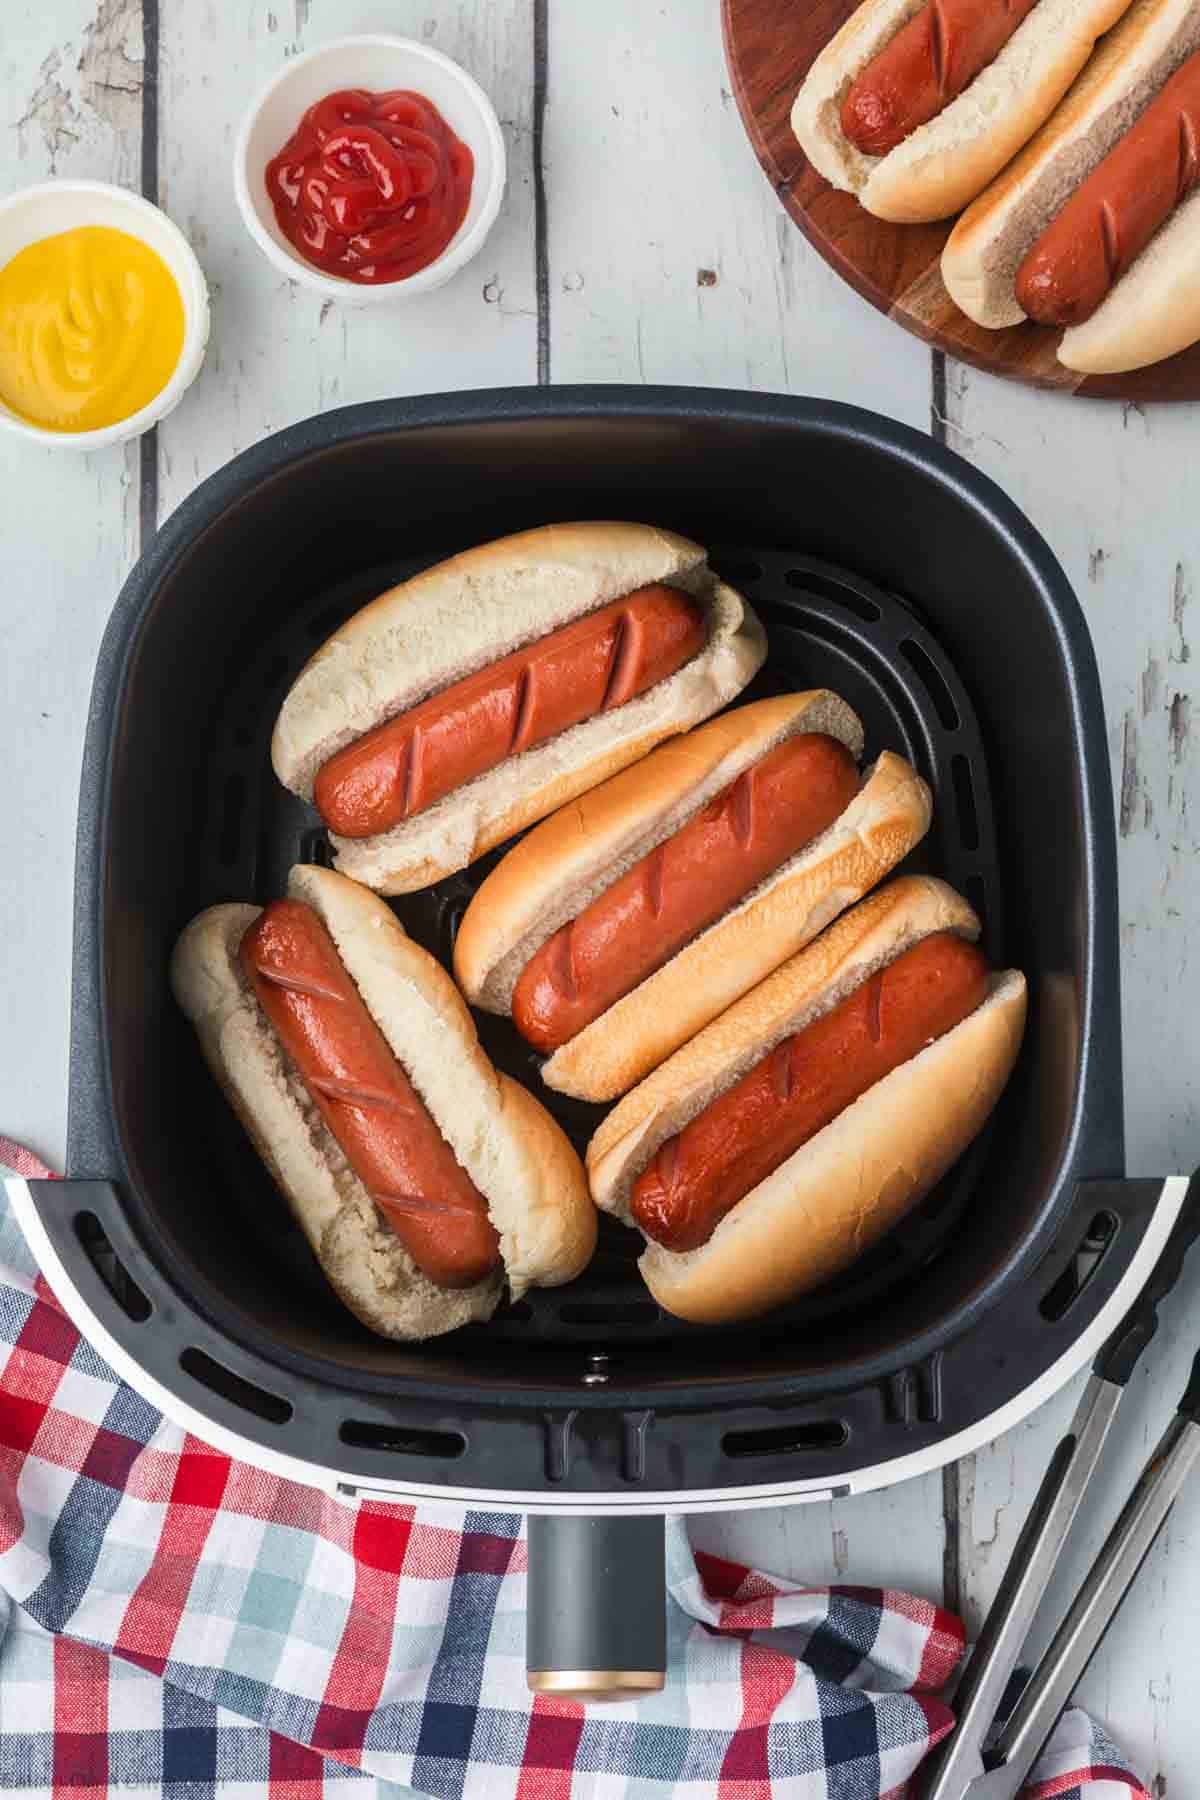 Hot dogs in hot dog buns in an air fryer basket